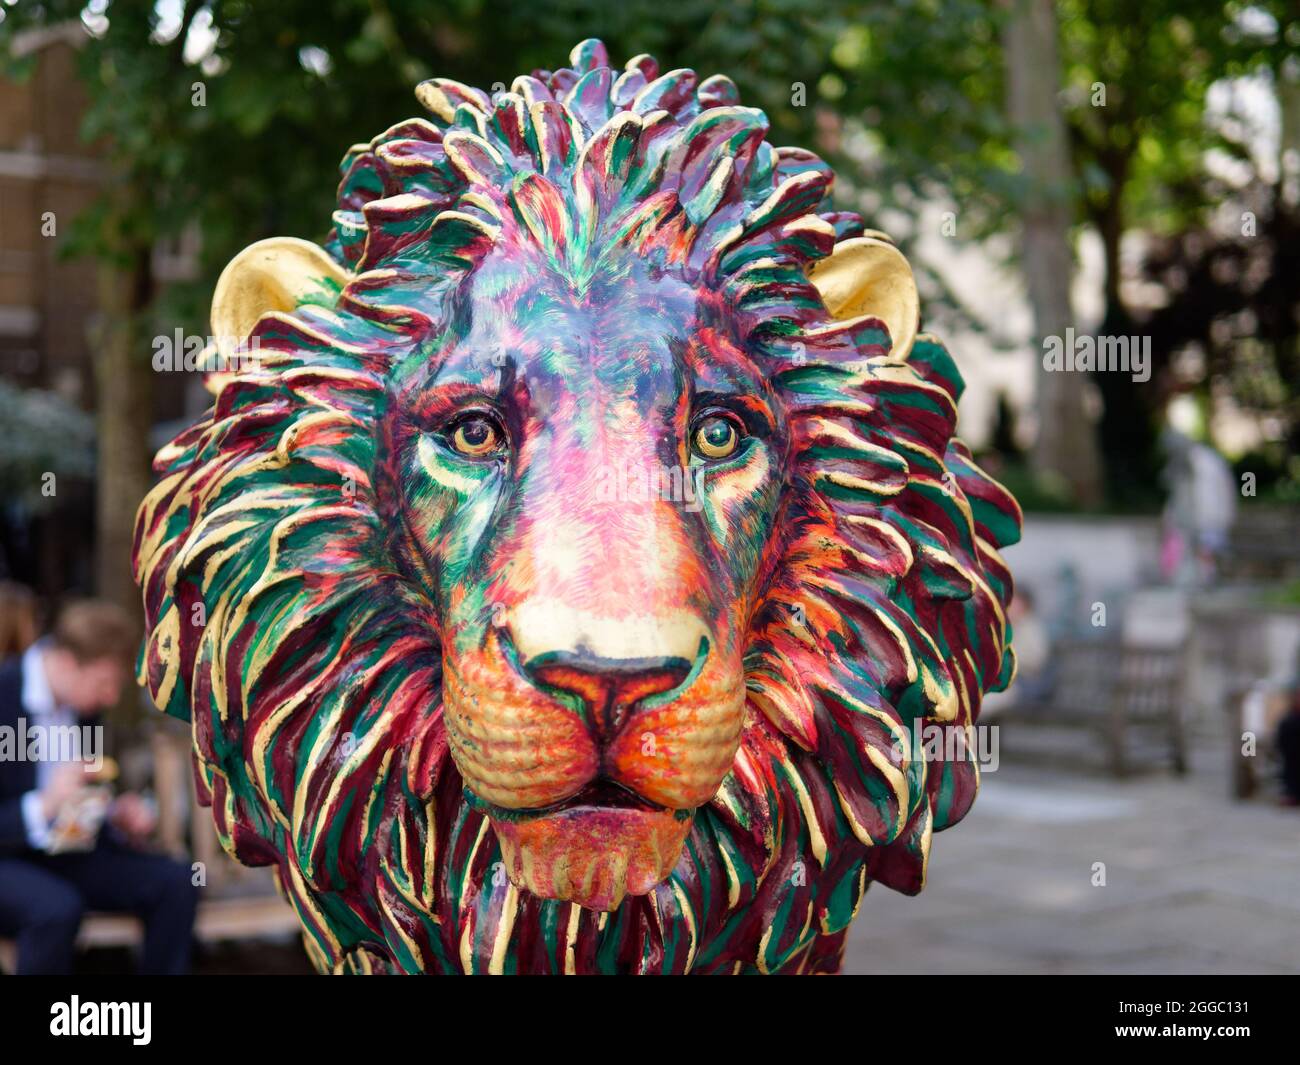 London, Greater London, England, August 24 2021: The London Pride Tusk Lion Trail, Brian the Lion by Hannah Shergold in St Jamess Chuchyard Stock Photo